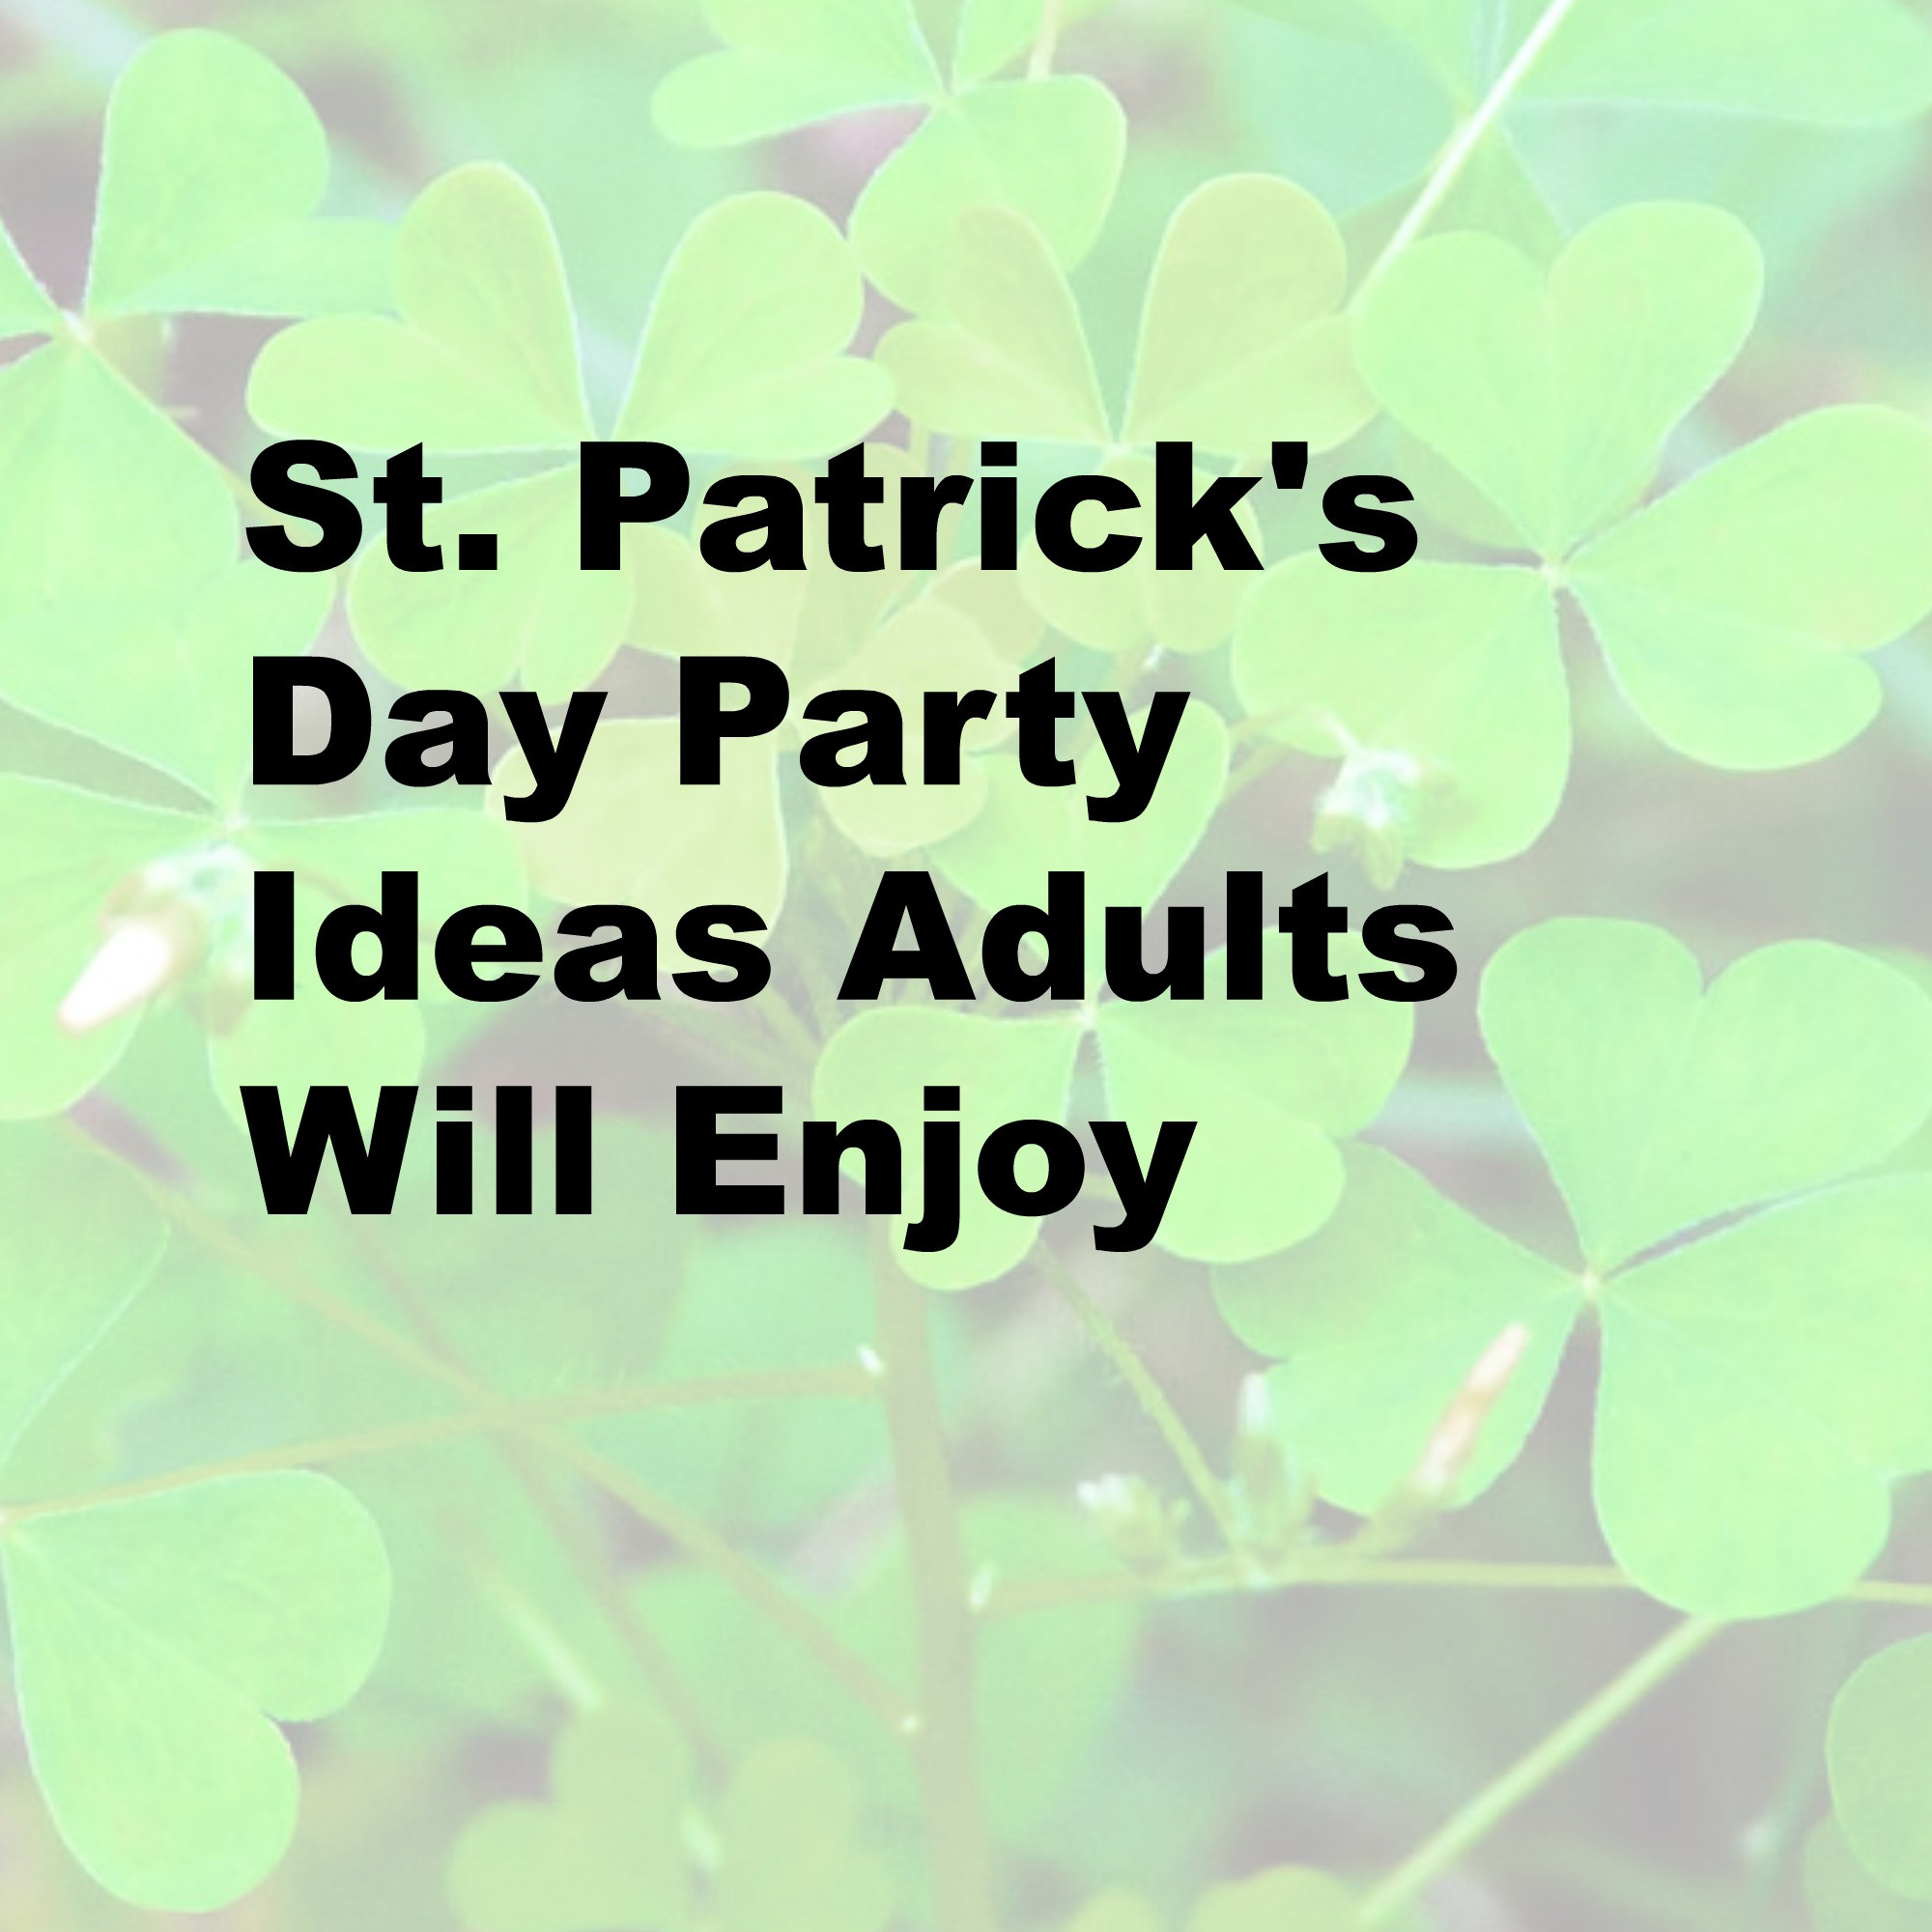 St Patrick Day Party Ideas For Adults
 St Patrick s Day Party Ideas Adults Will EnjoyLife After 60